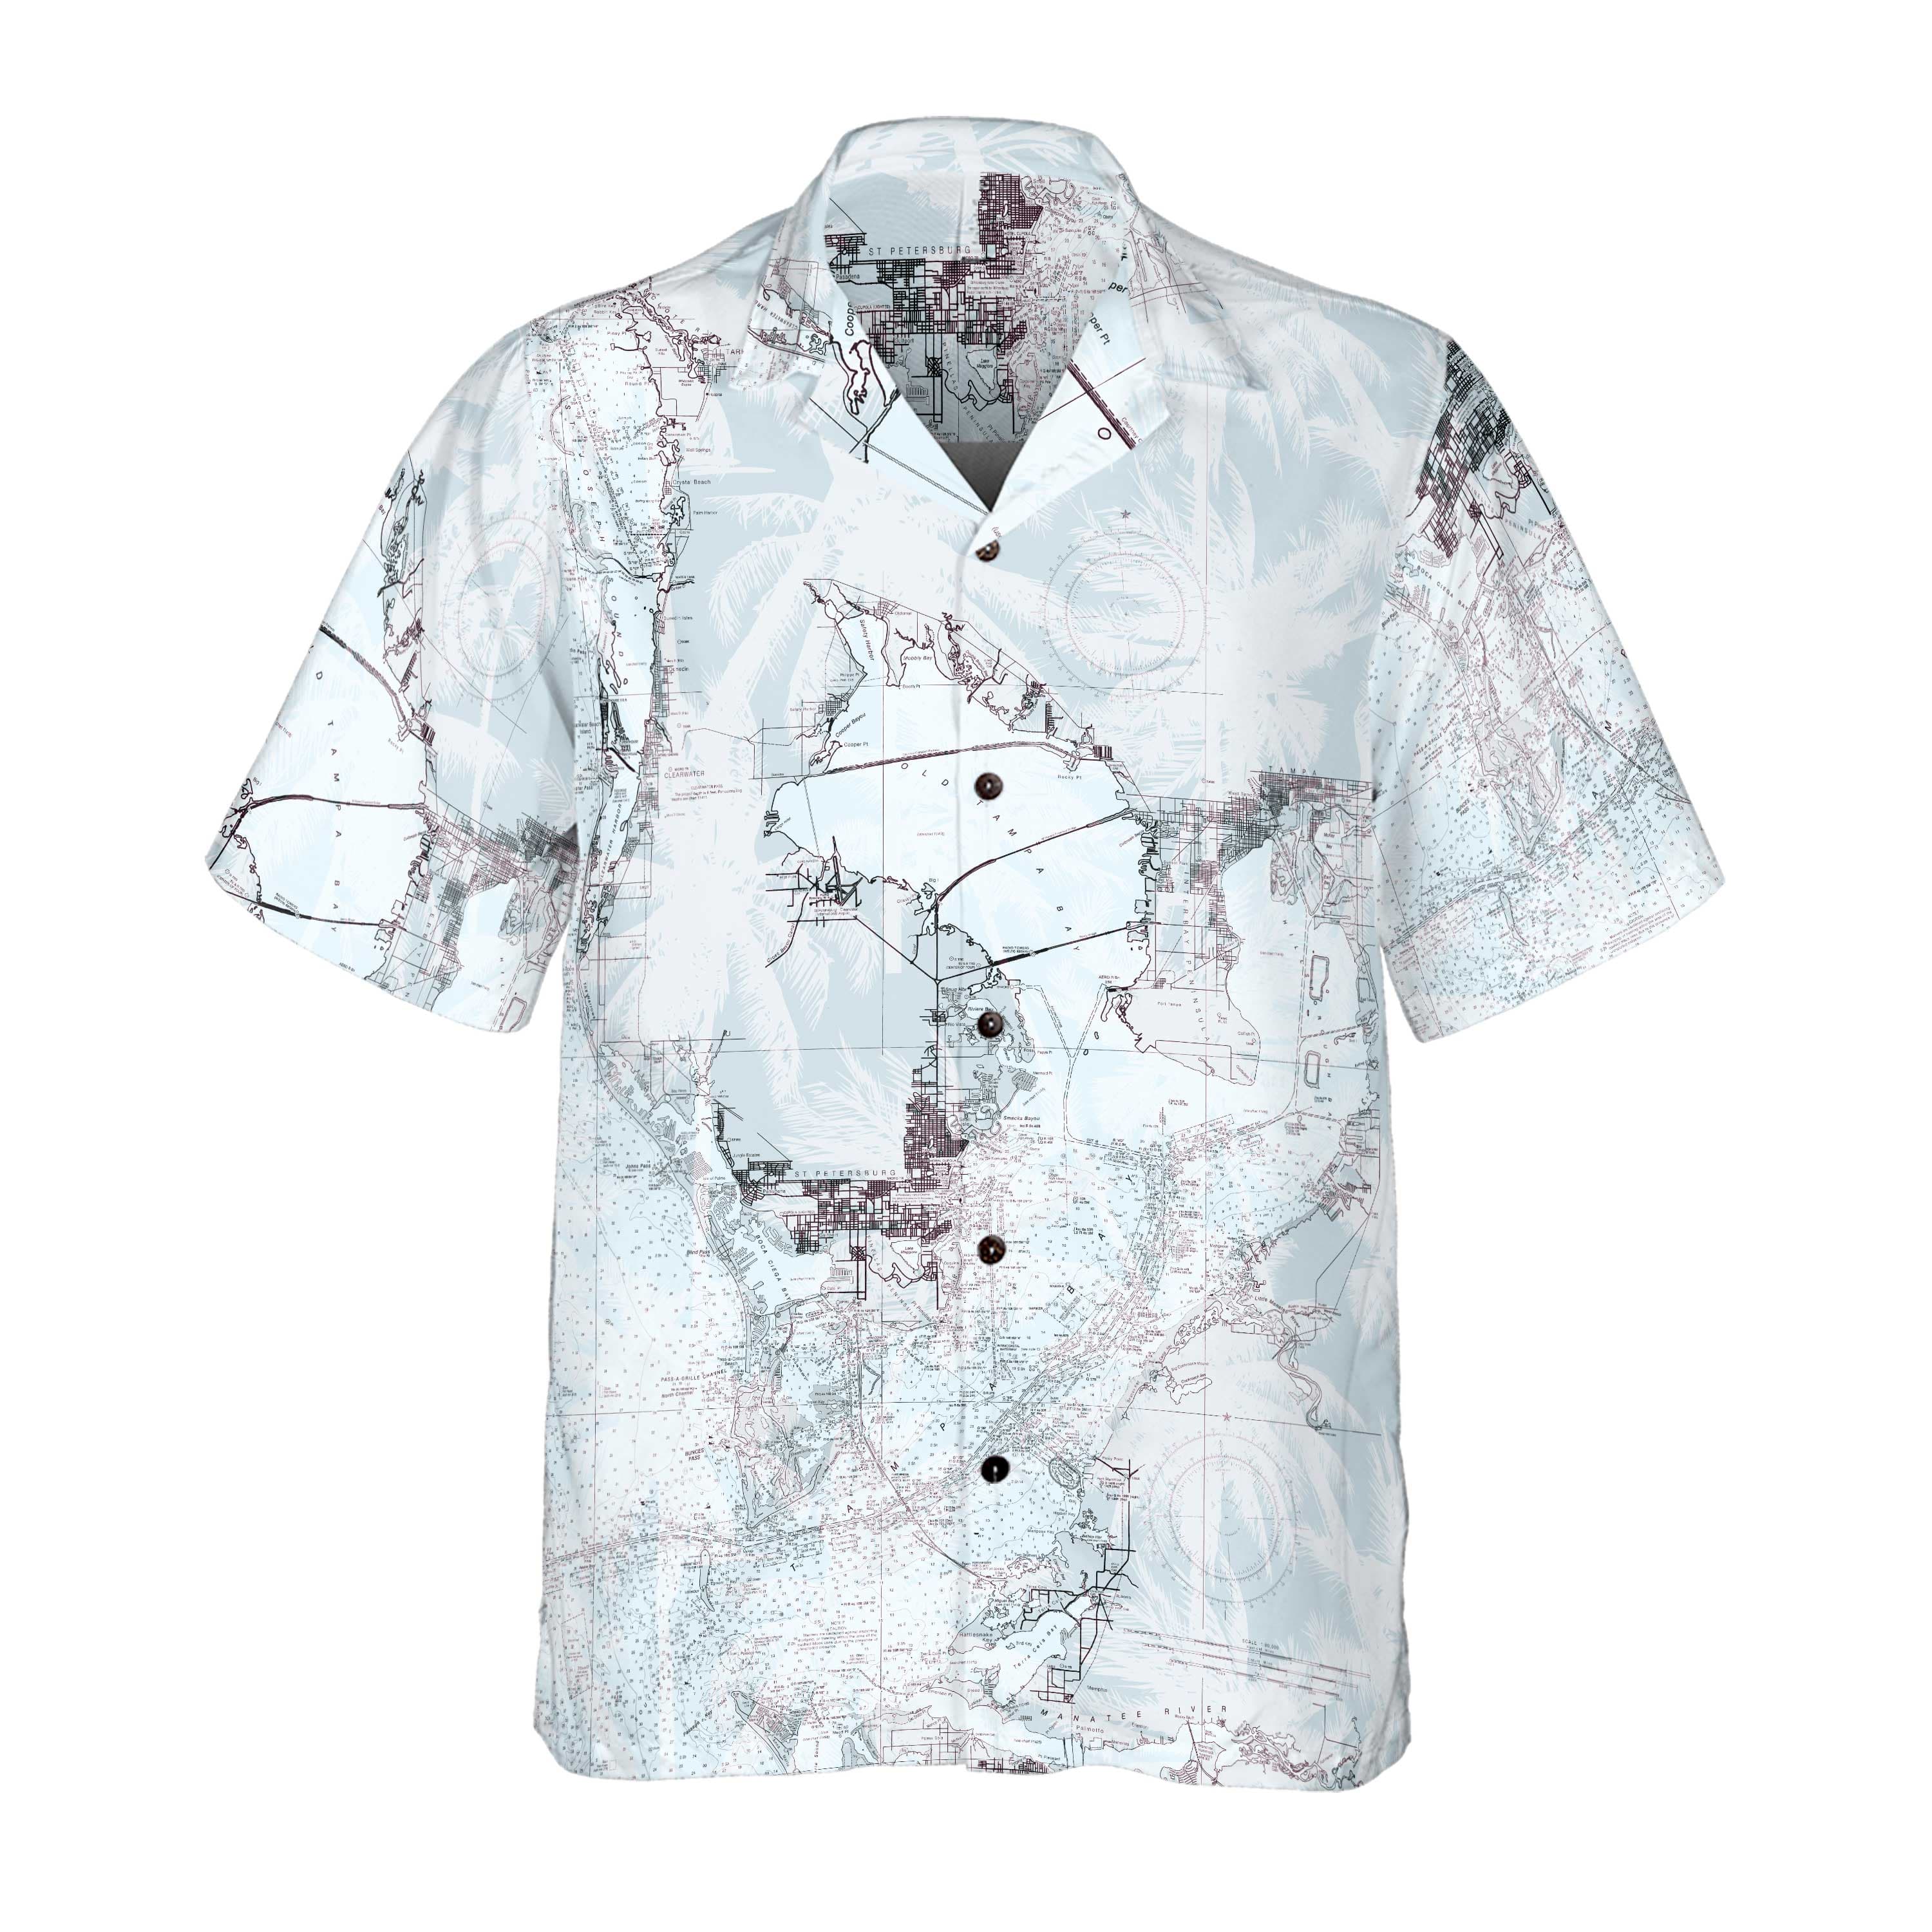 The Tampa Blue Sky Palms Coconut Button Camp Shirt